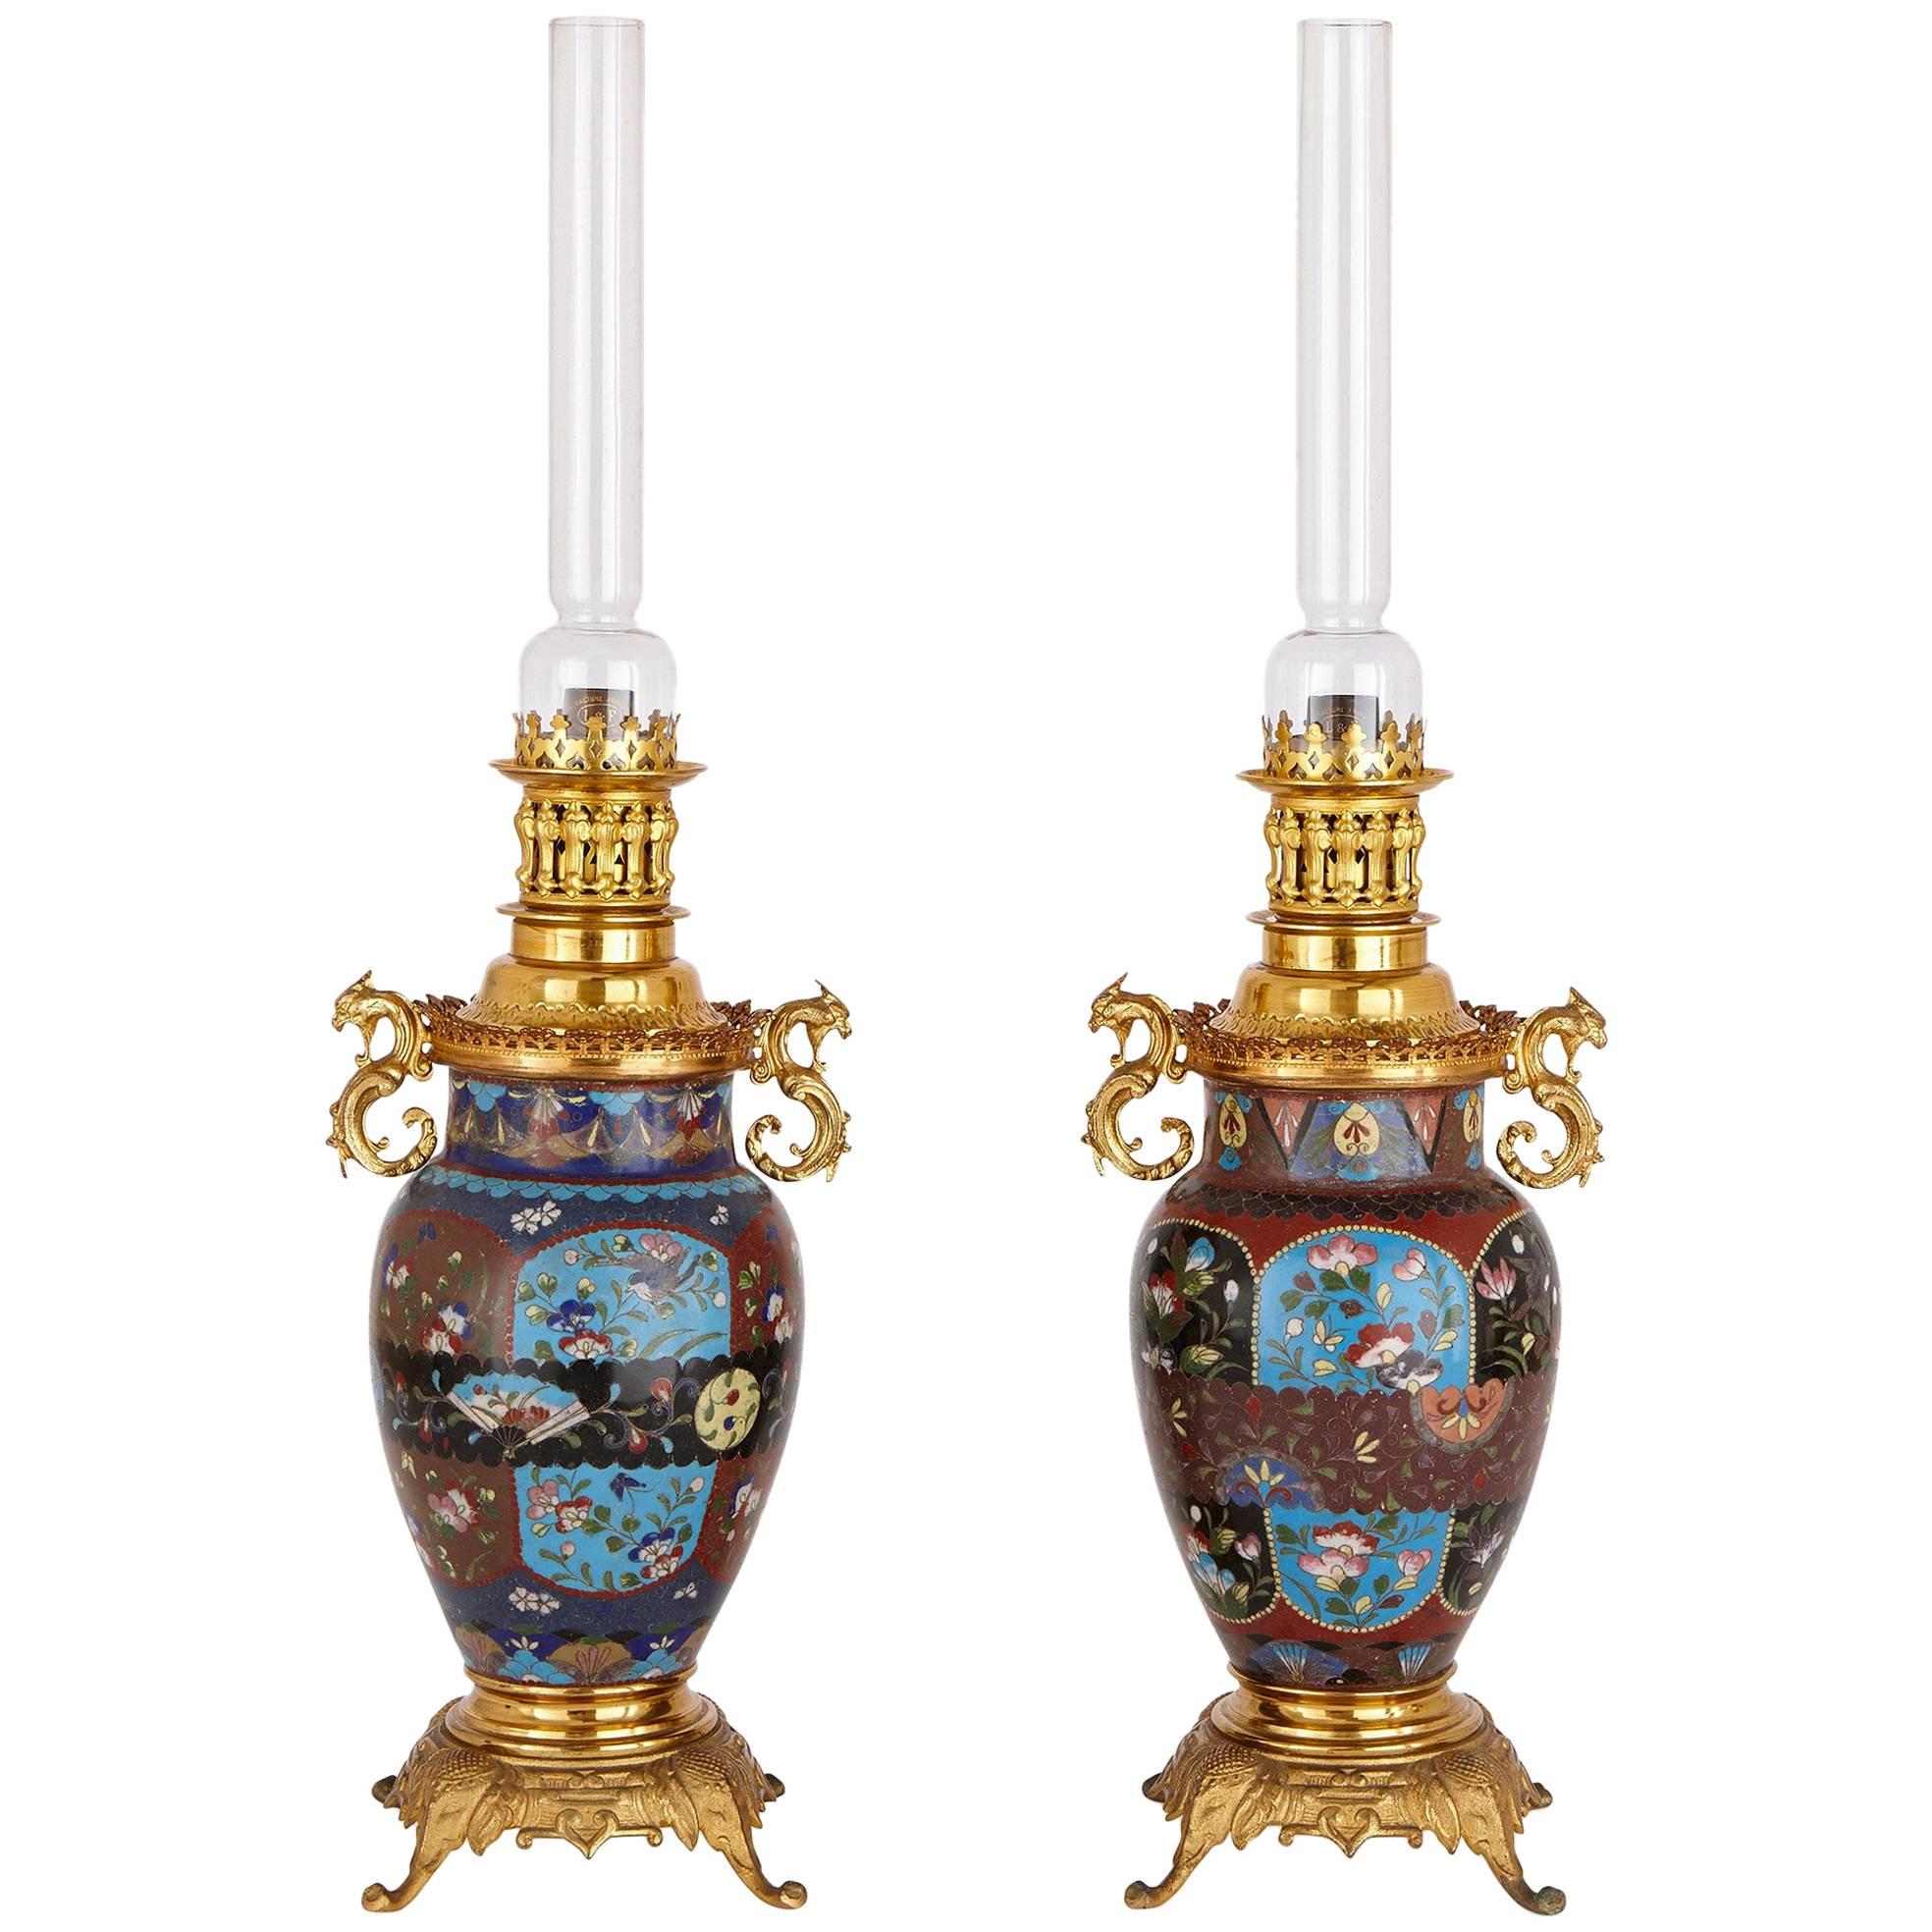 Pair of Japanese Style Gilt Bronze and Cloisonne Enamel Lamps